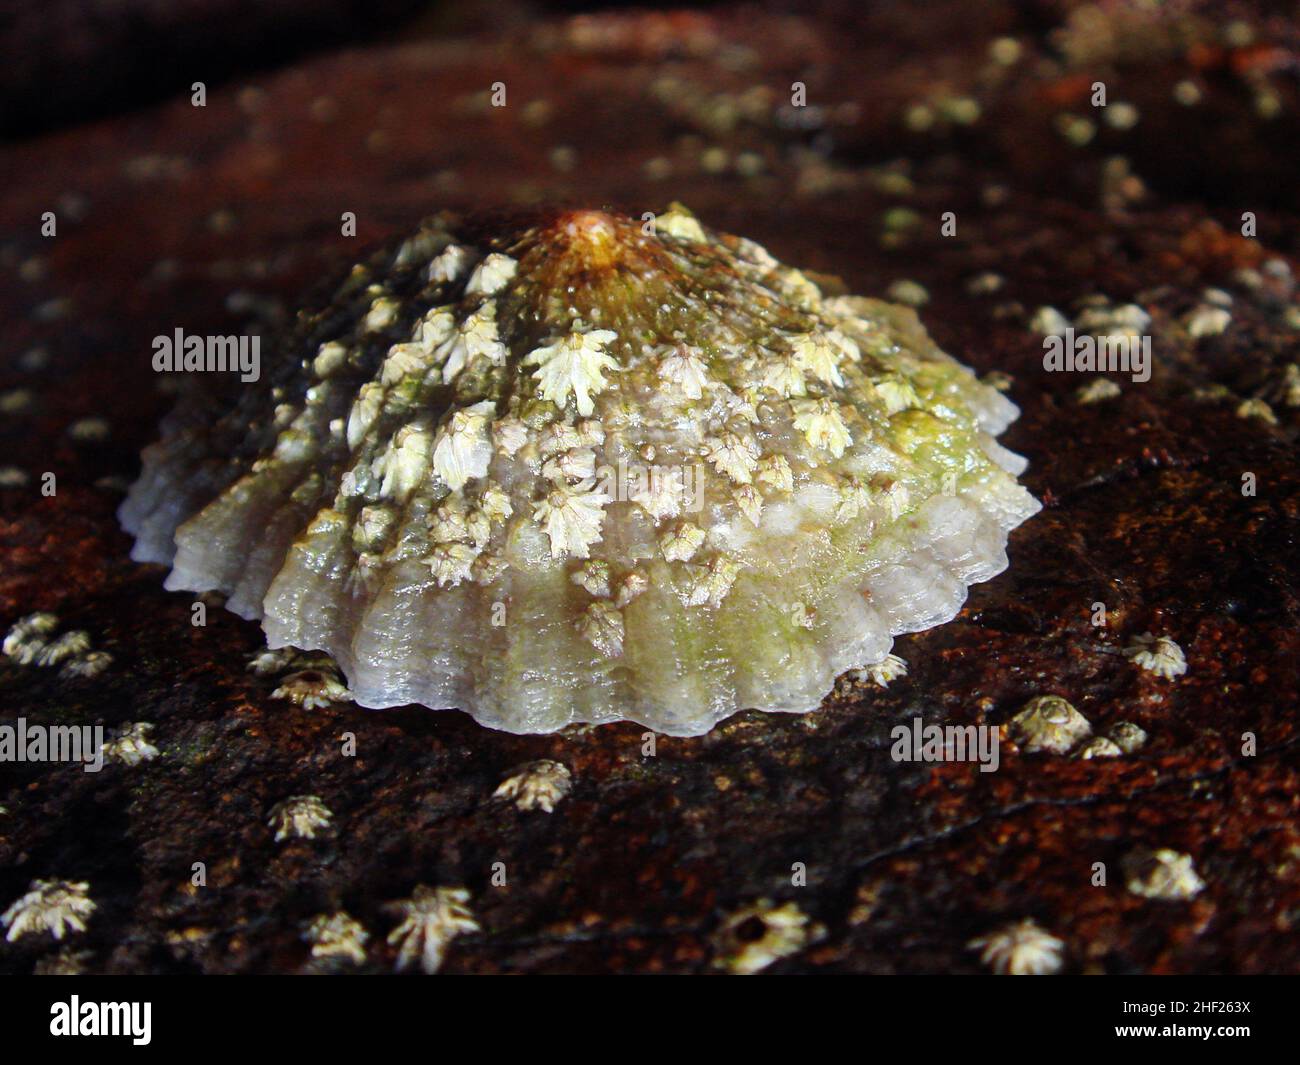 Lapas or patella vulgata, a limpet found anchored to the rocks on the shores neighbouring the Canary Islands a gastropod mollusk used in local cuisine Stock Photo